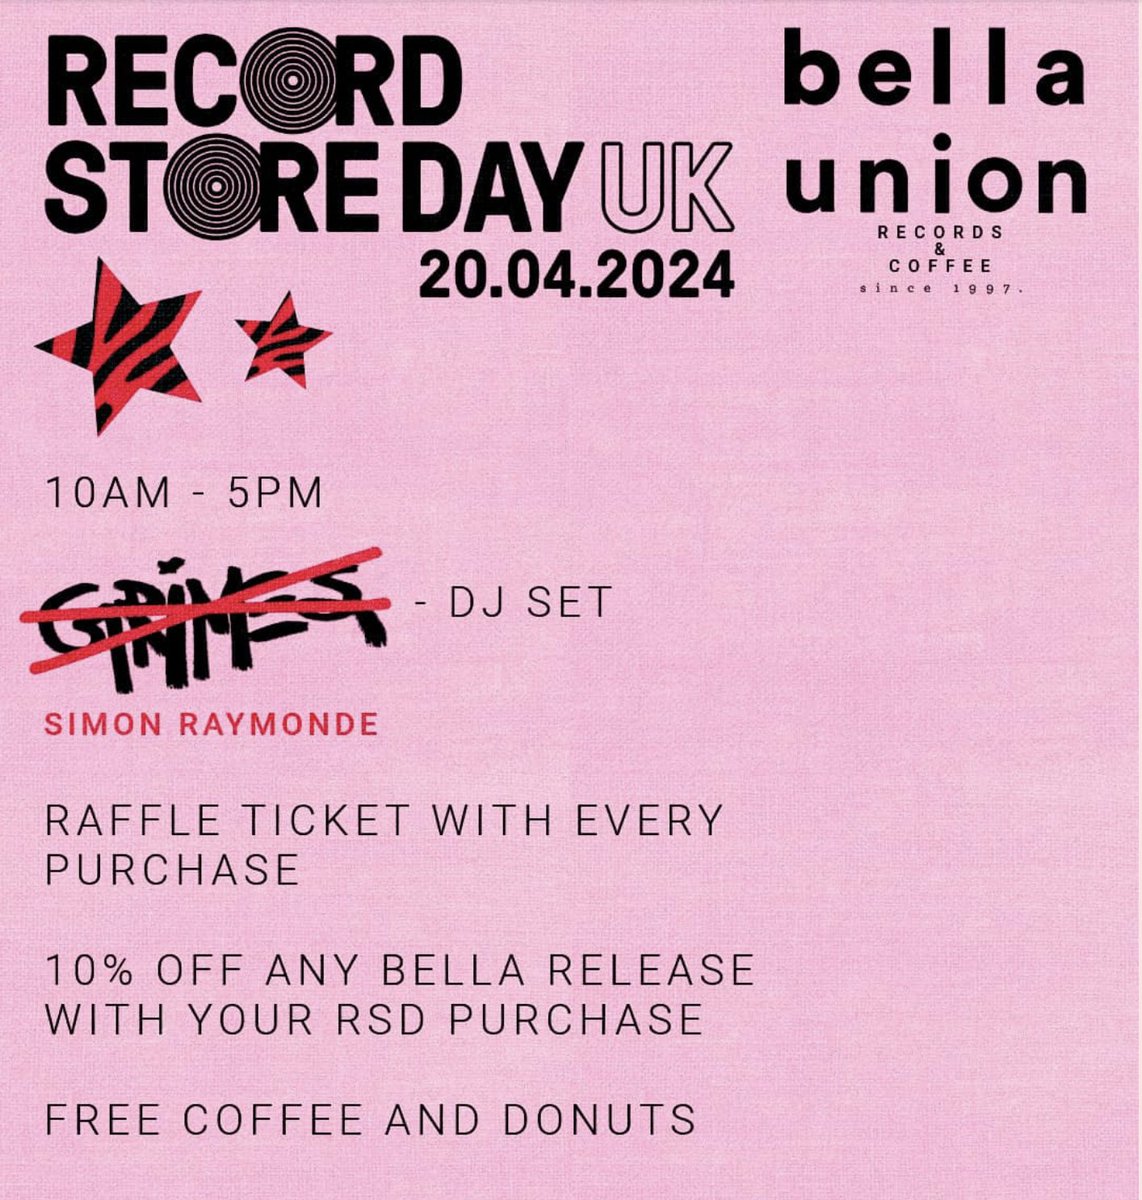 If you're visiting the @BellaUnionVinyl store in Brighton for @RSDUK , please note the change of DJ* *you prefer the one from the life changing band and record label right? #RSD24 #RSD Wish I could go. ☕️🍩